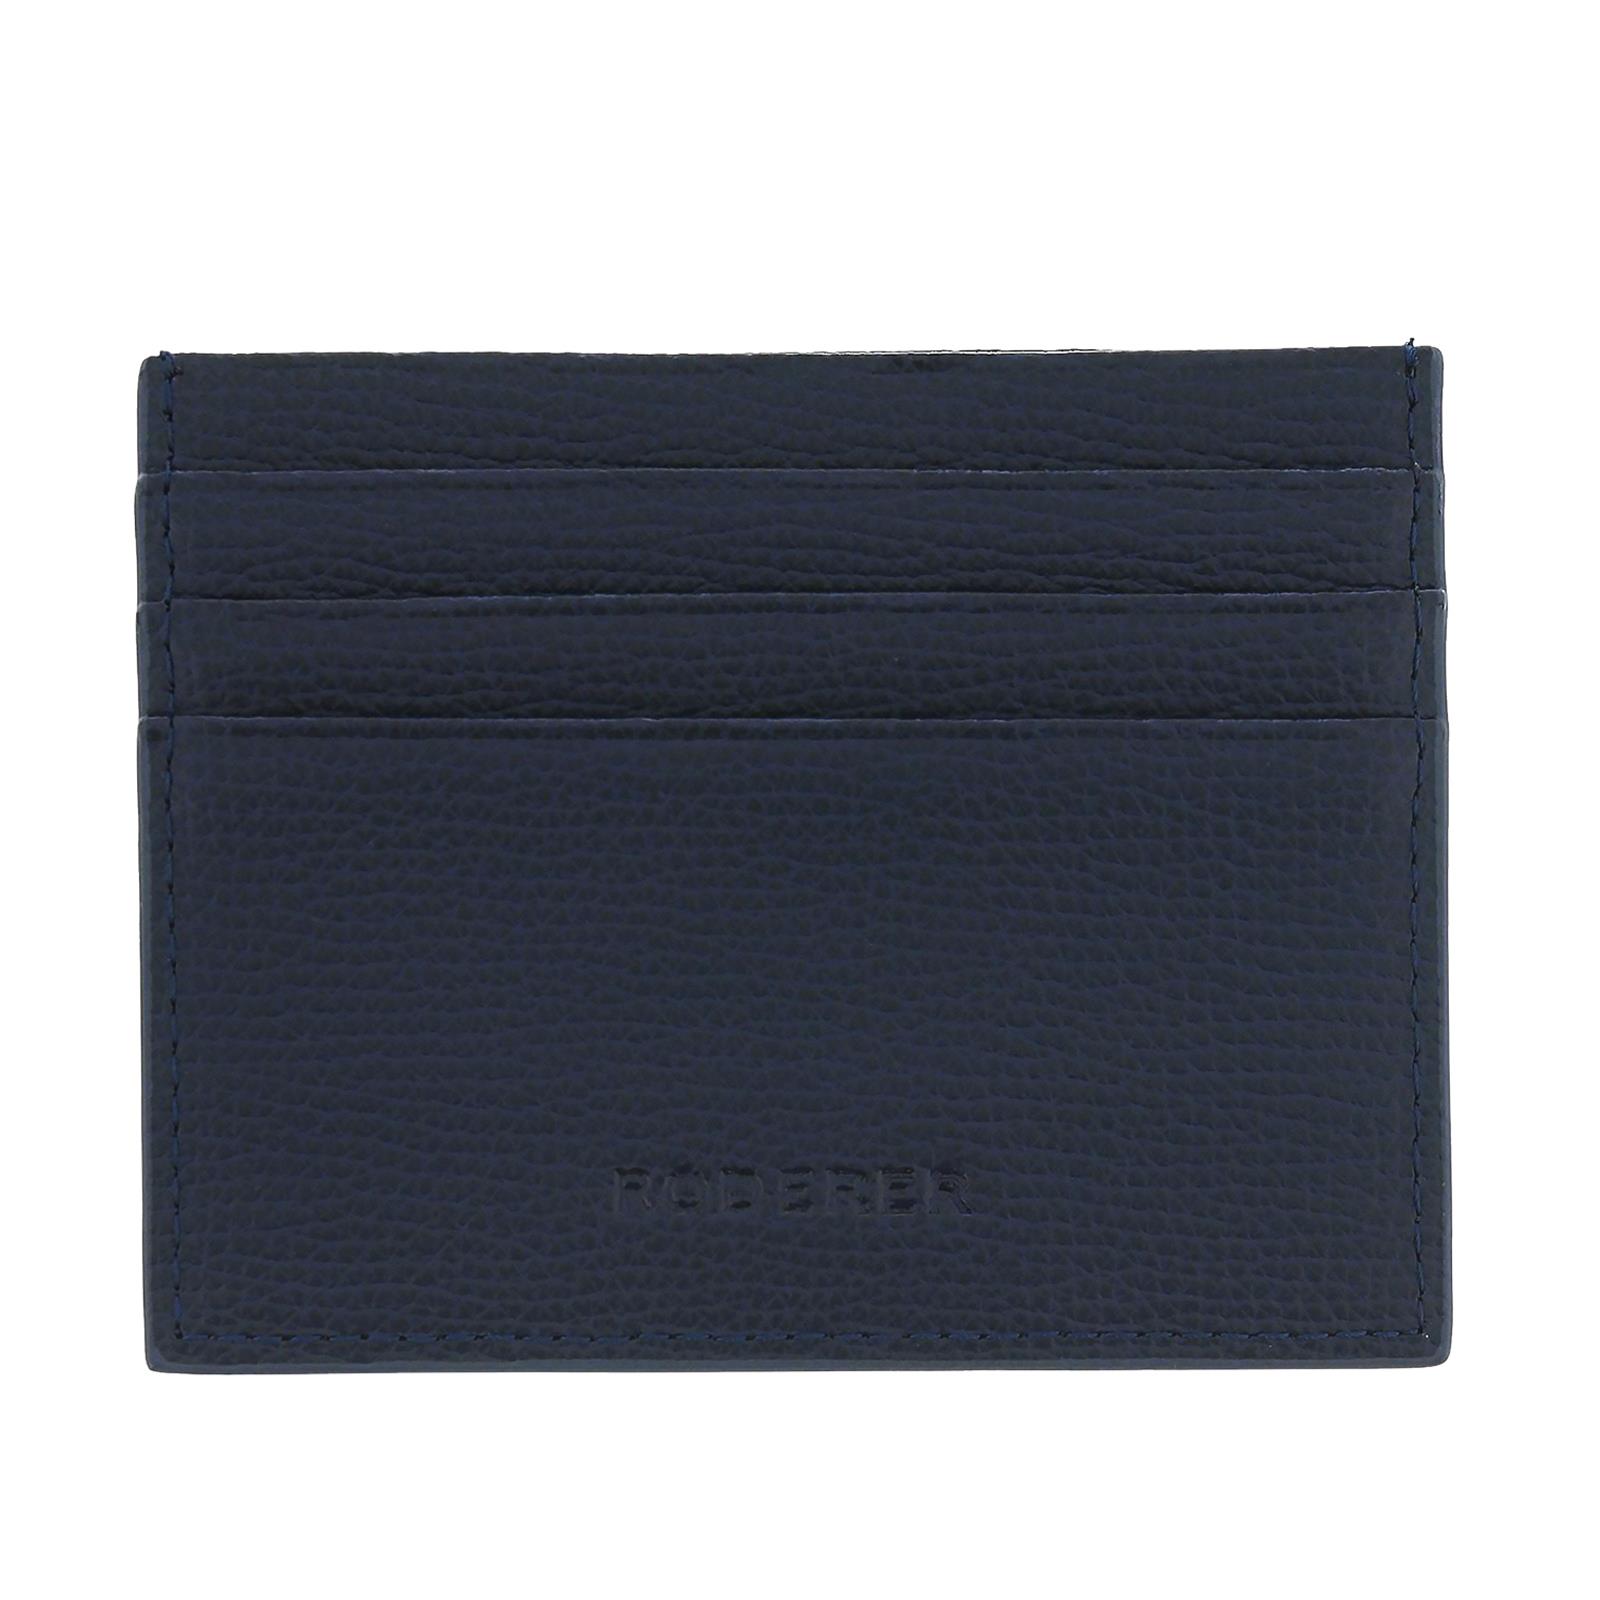 Discover The New Award 6cc Card Holder